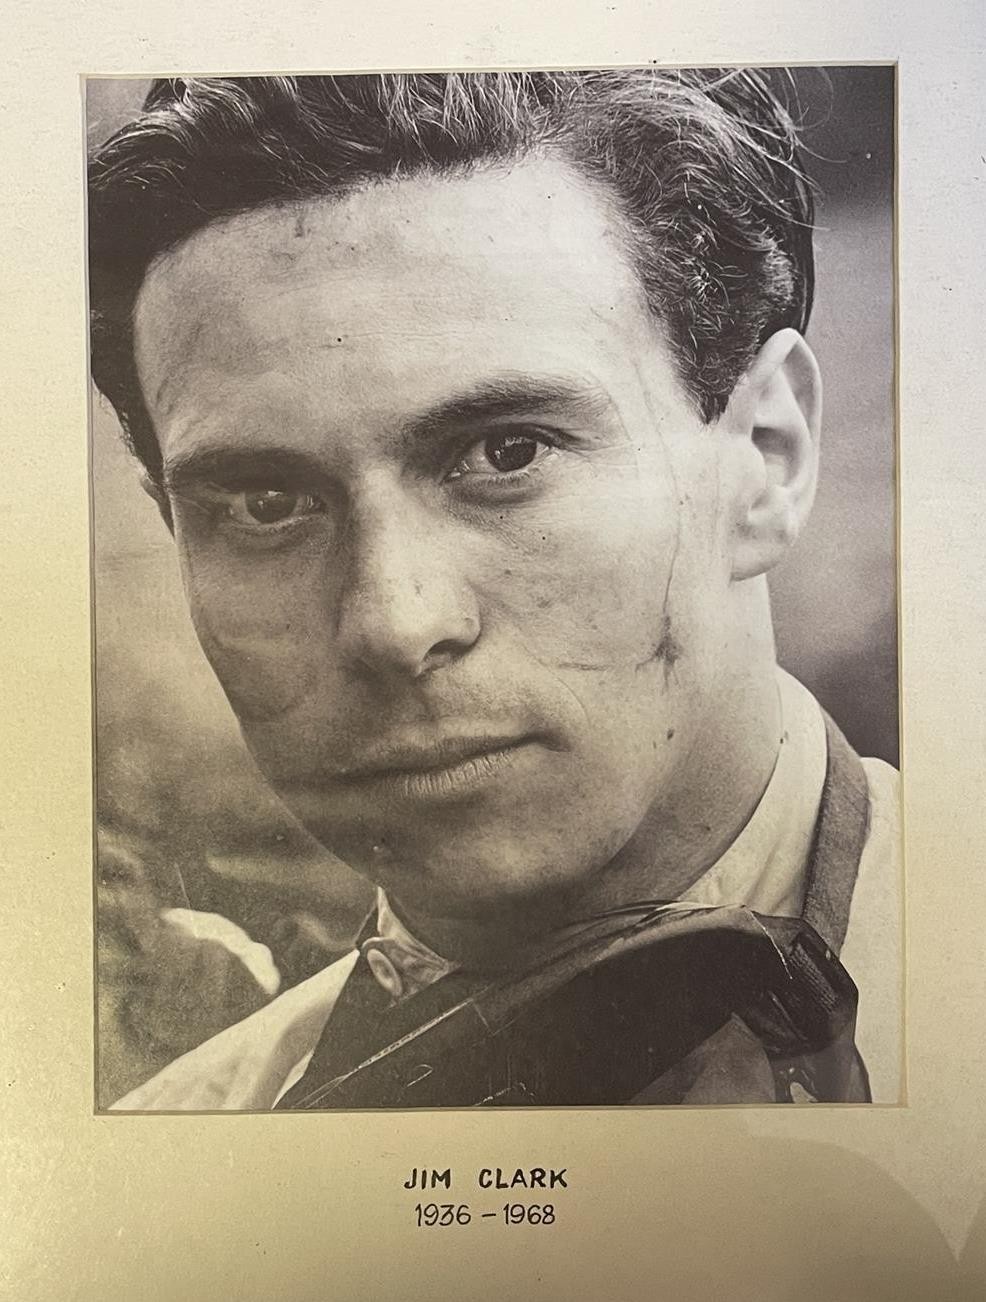 A group of assorted monochrome photographs of racing cars and drivers, including Jim Clark (13)